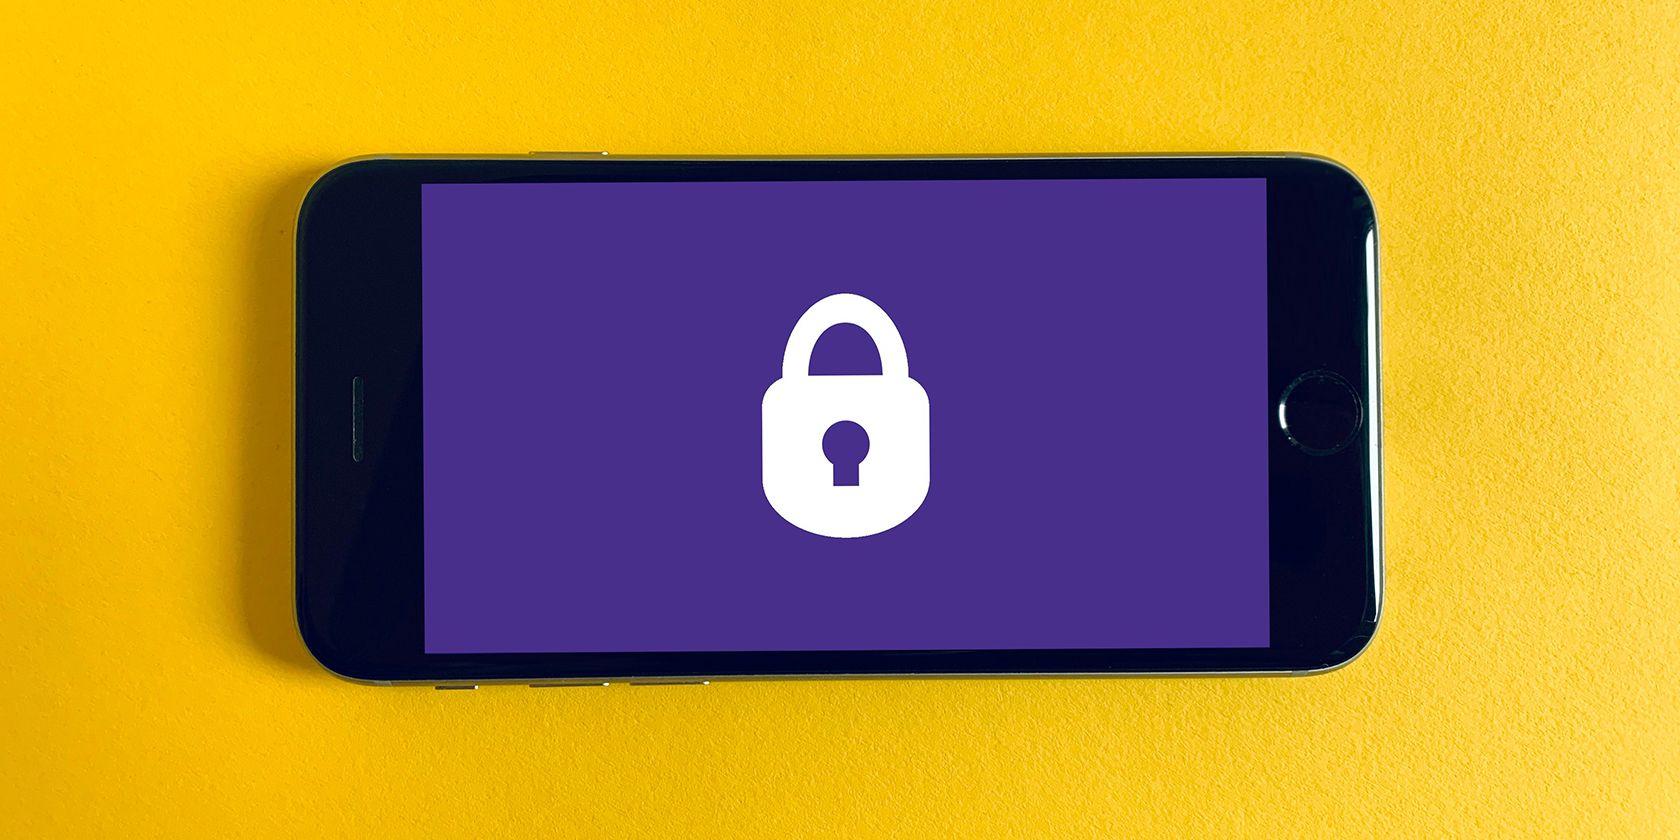 A locked phone over yellow.